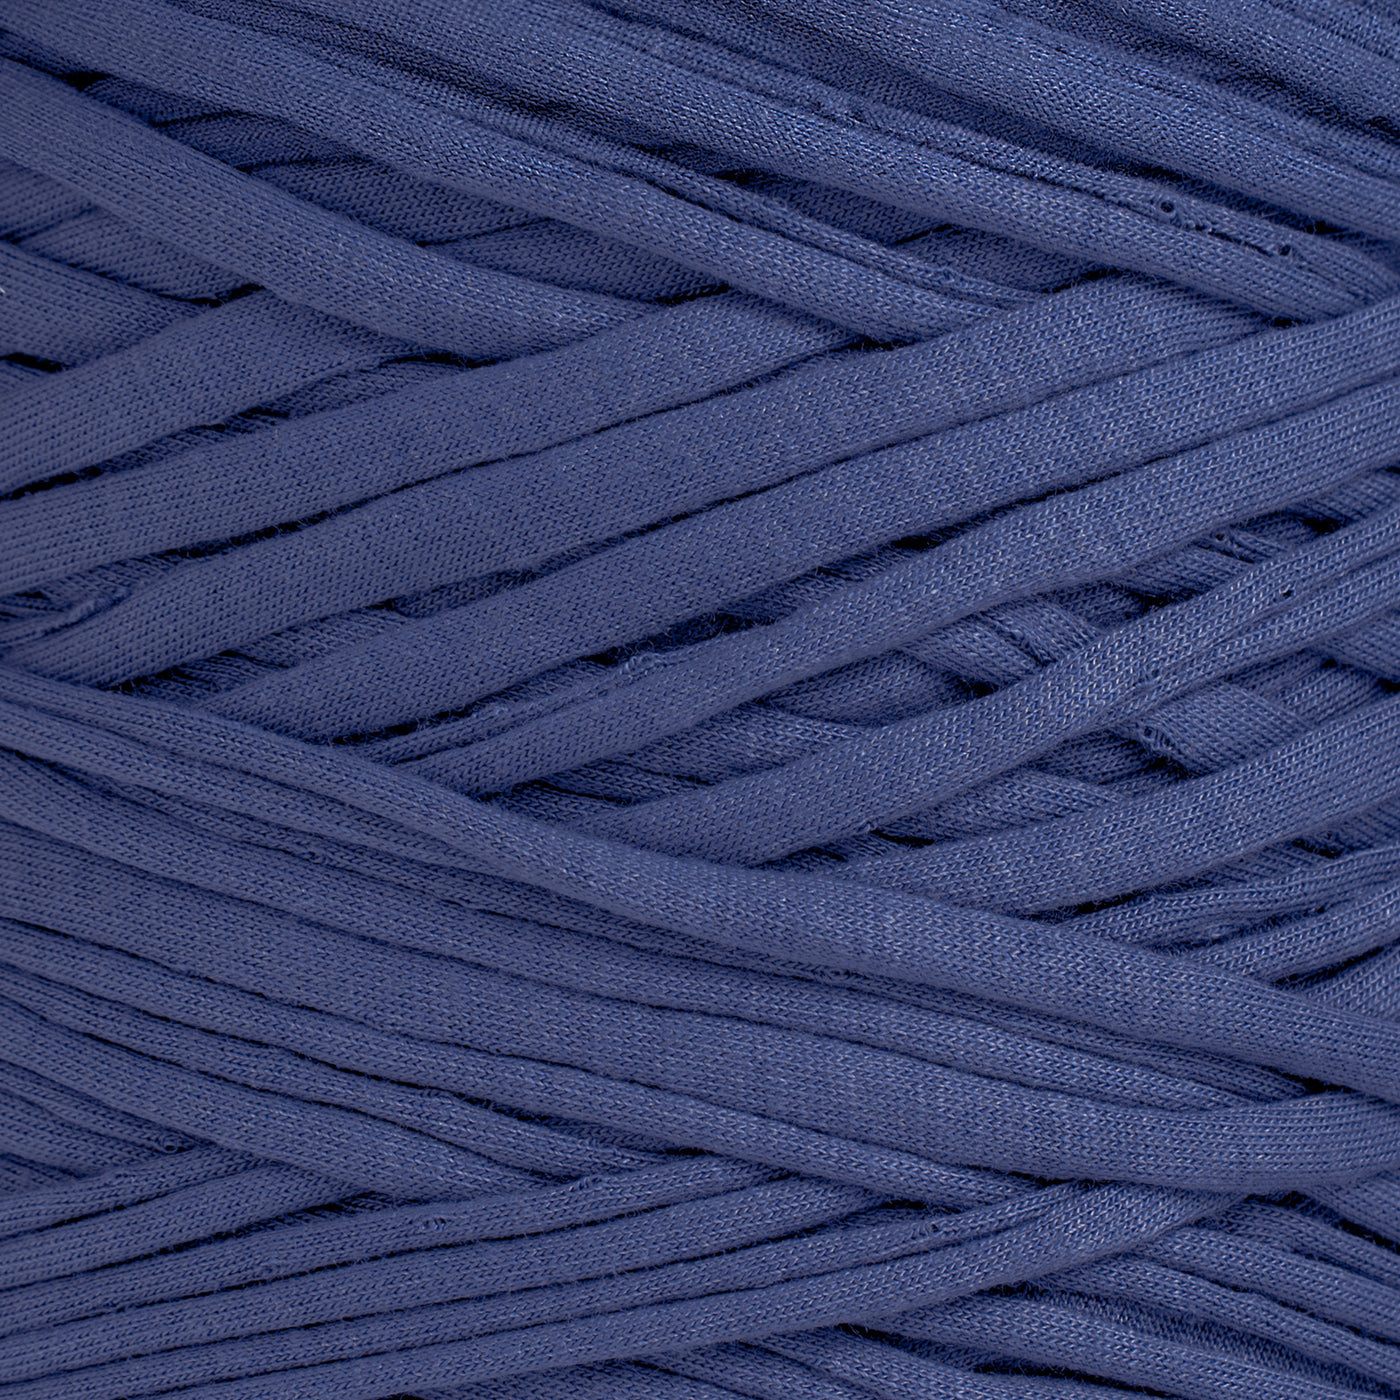 Recycled T-Shirt Fabric Yarn - Navy Blue Color